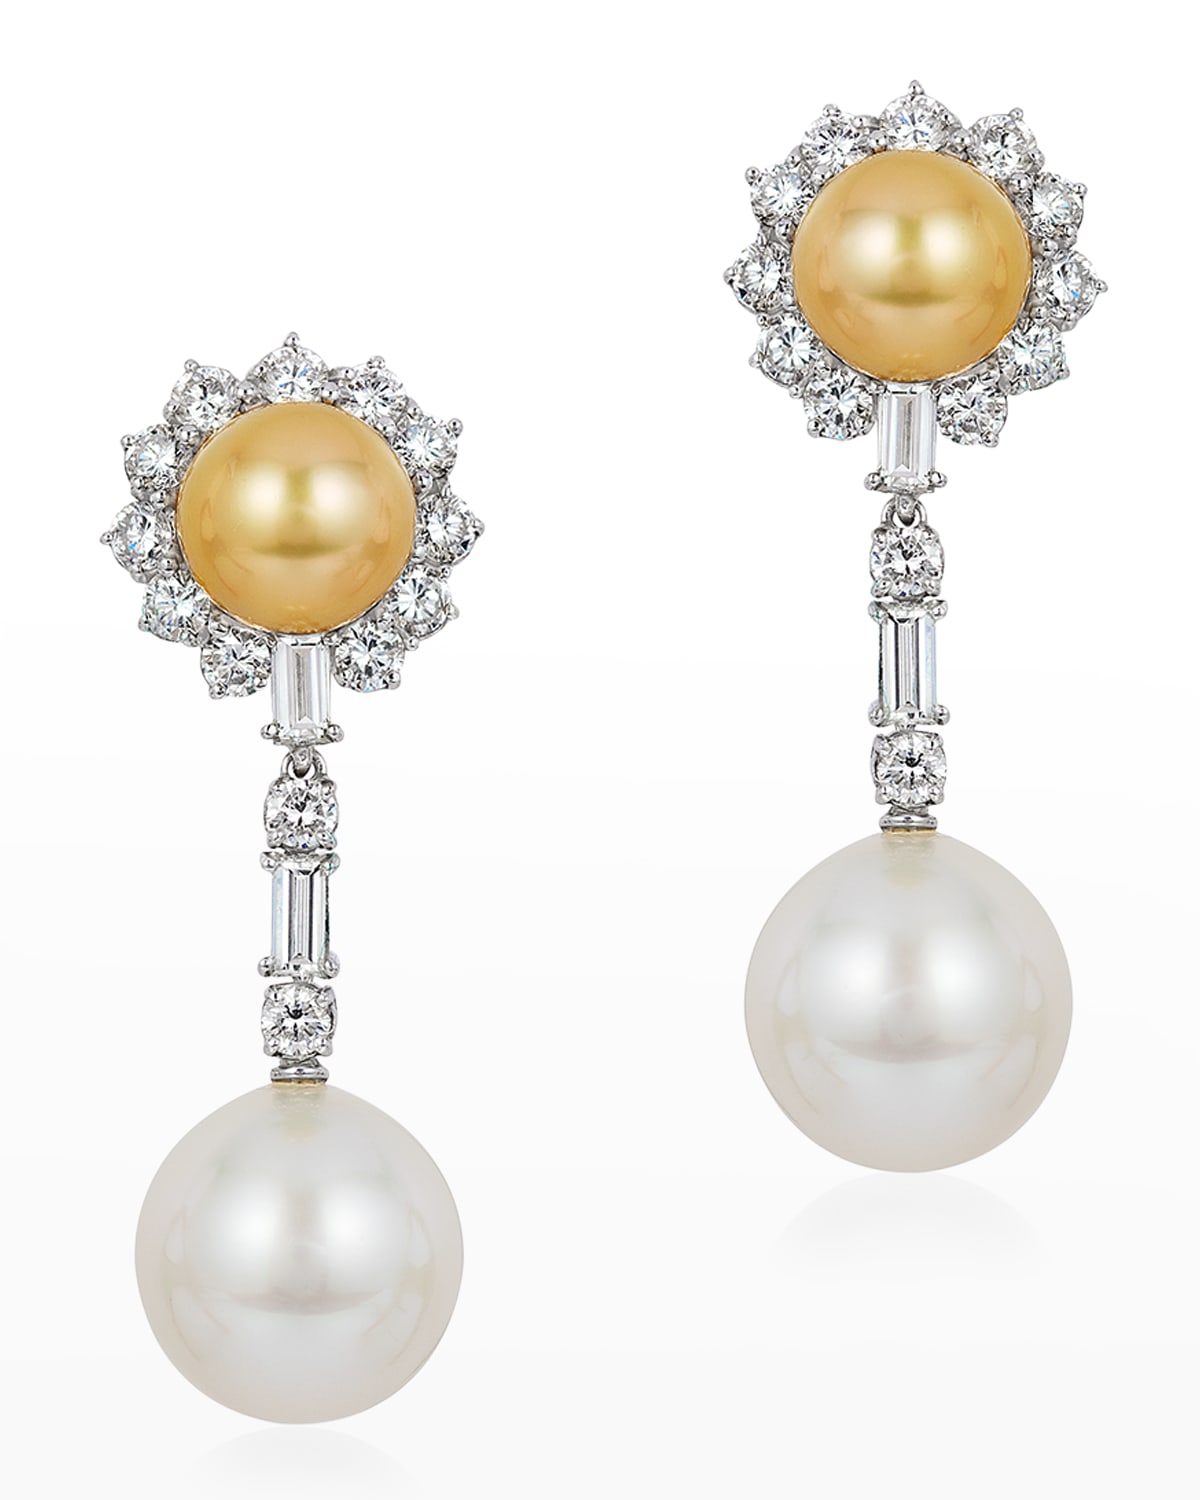 Andreoli Golden Pearl and Diamond Earrings